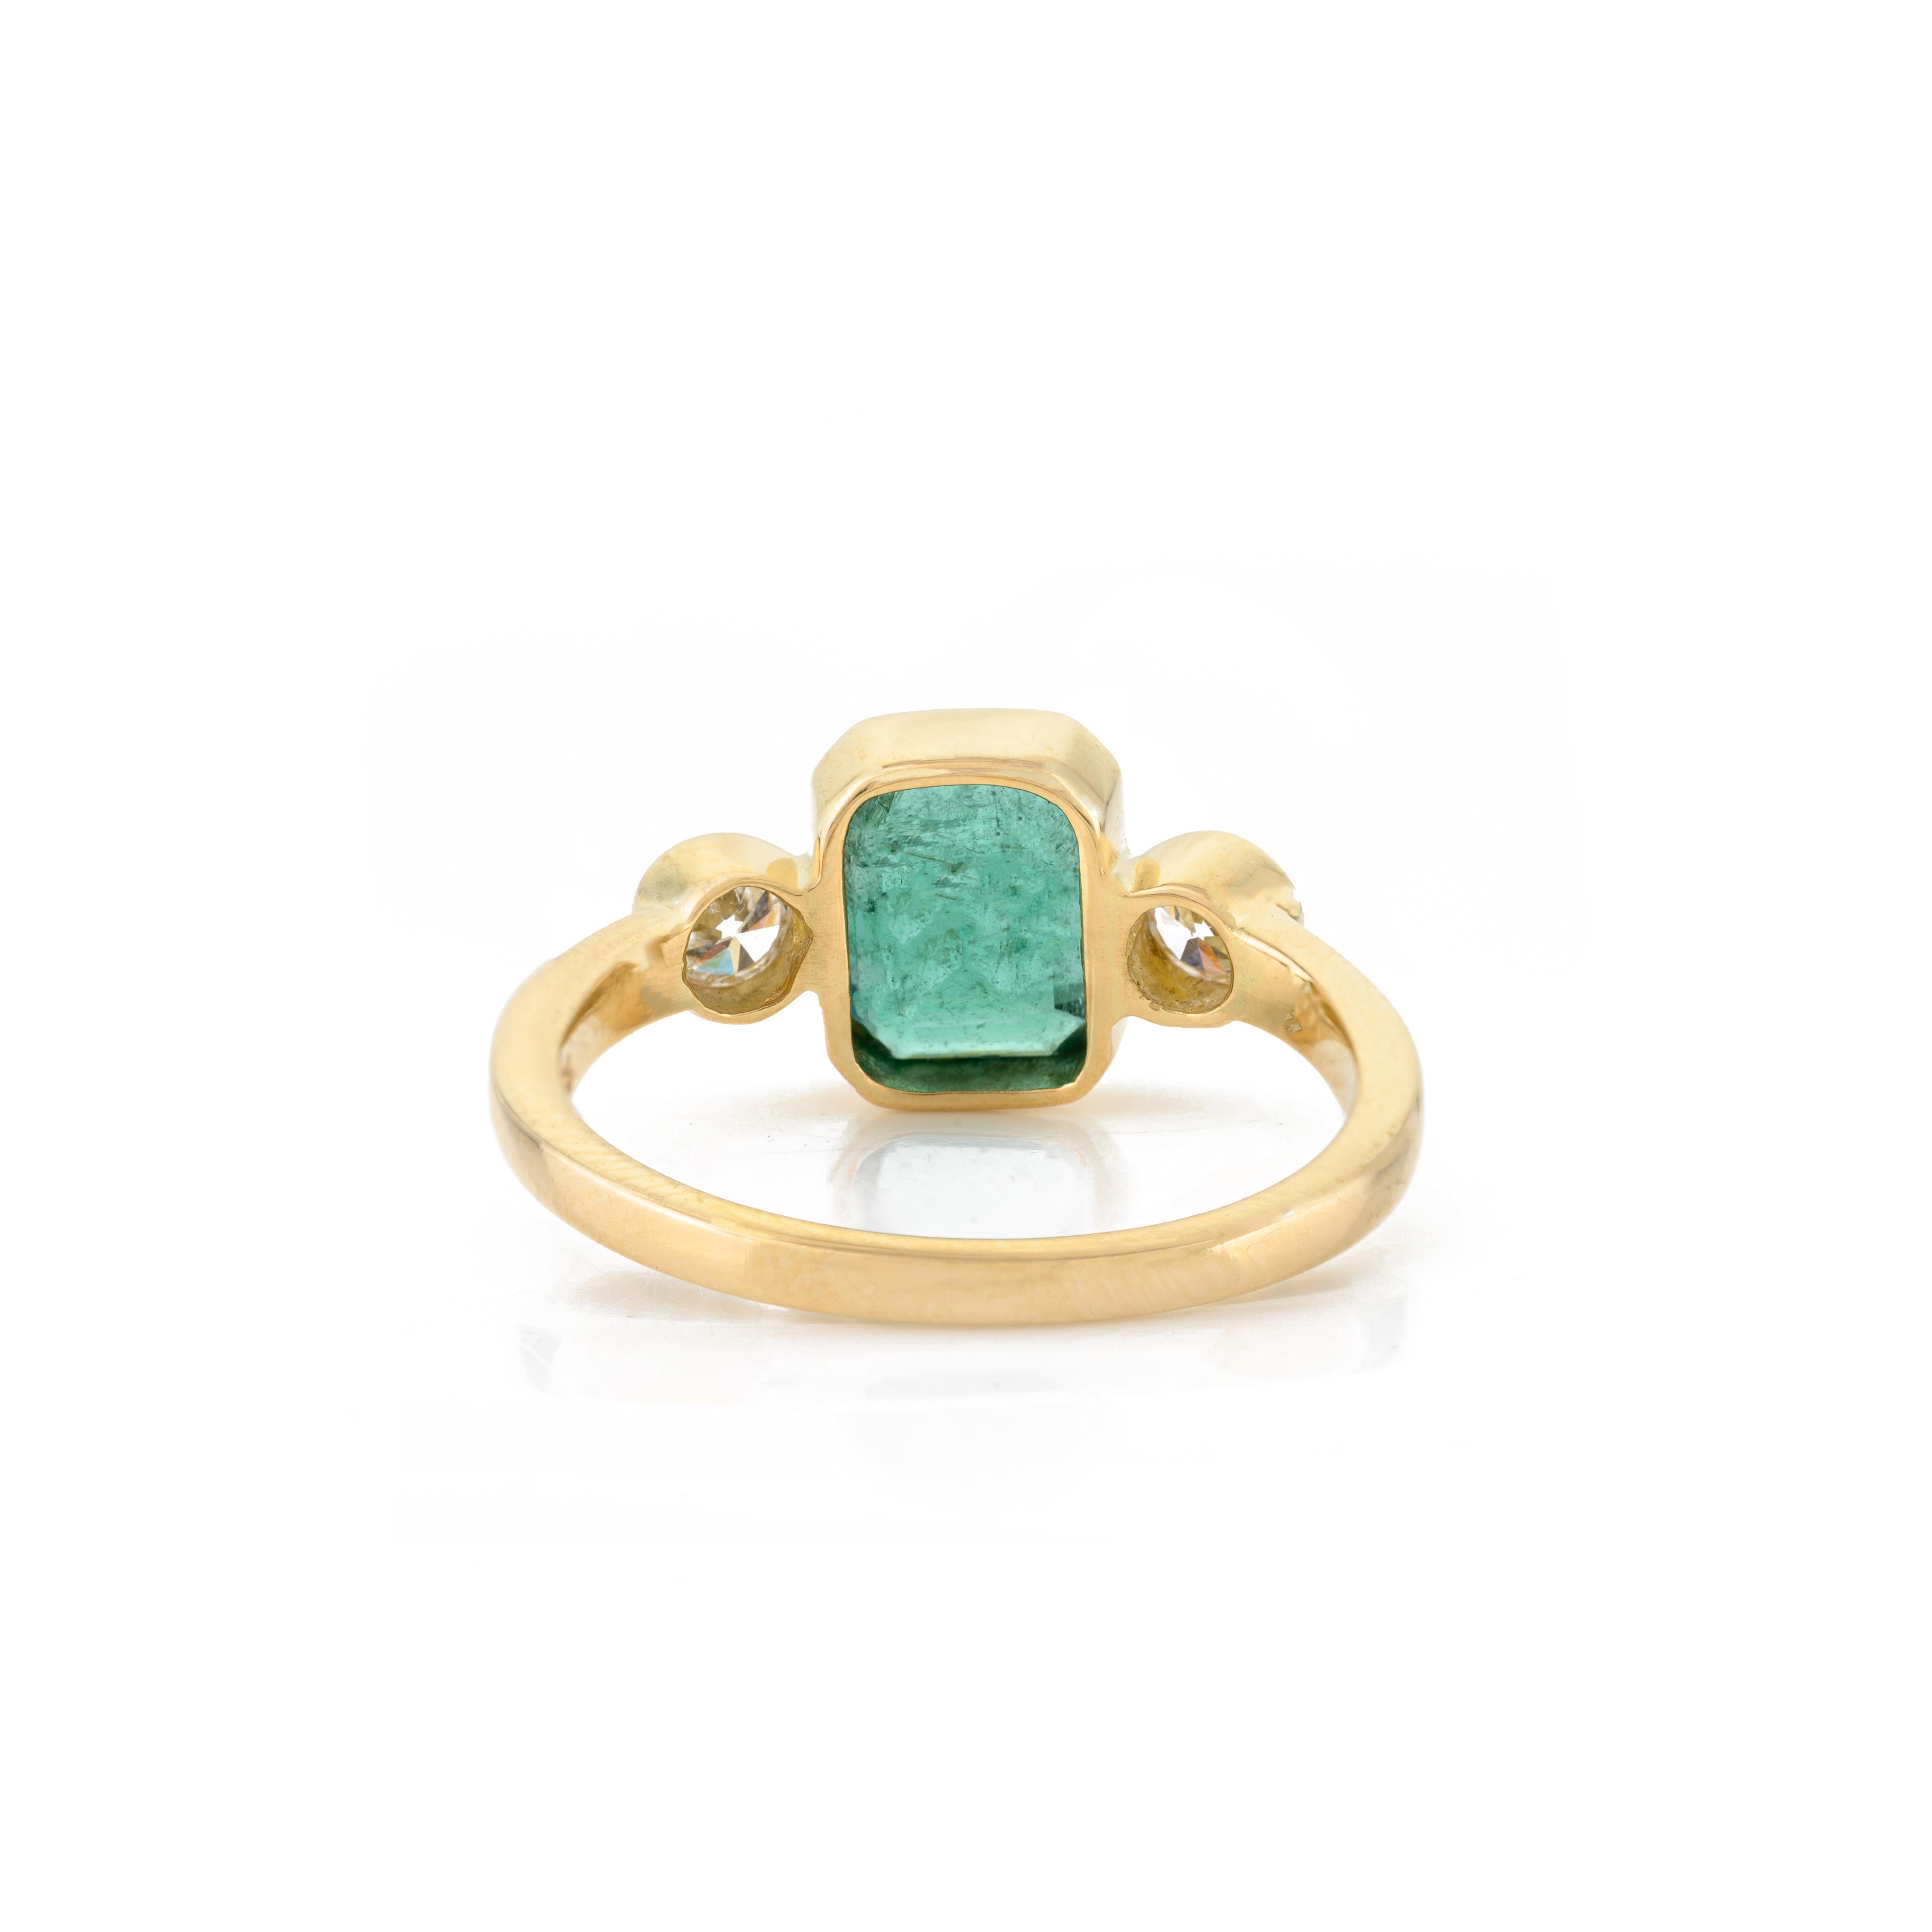 For Sale:  2.41 CTW Natural Emerald Diamond Three Stone Engagement Ring in 18k Yellow Gold 4